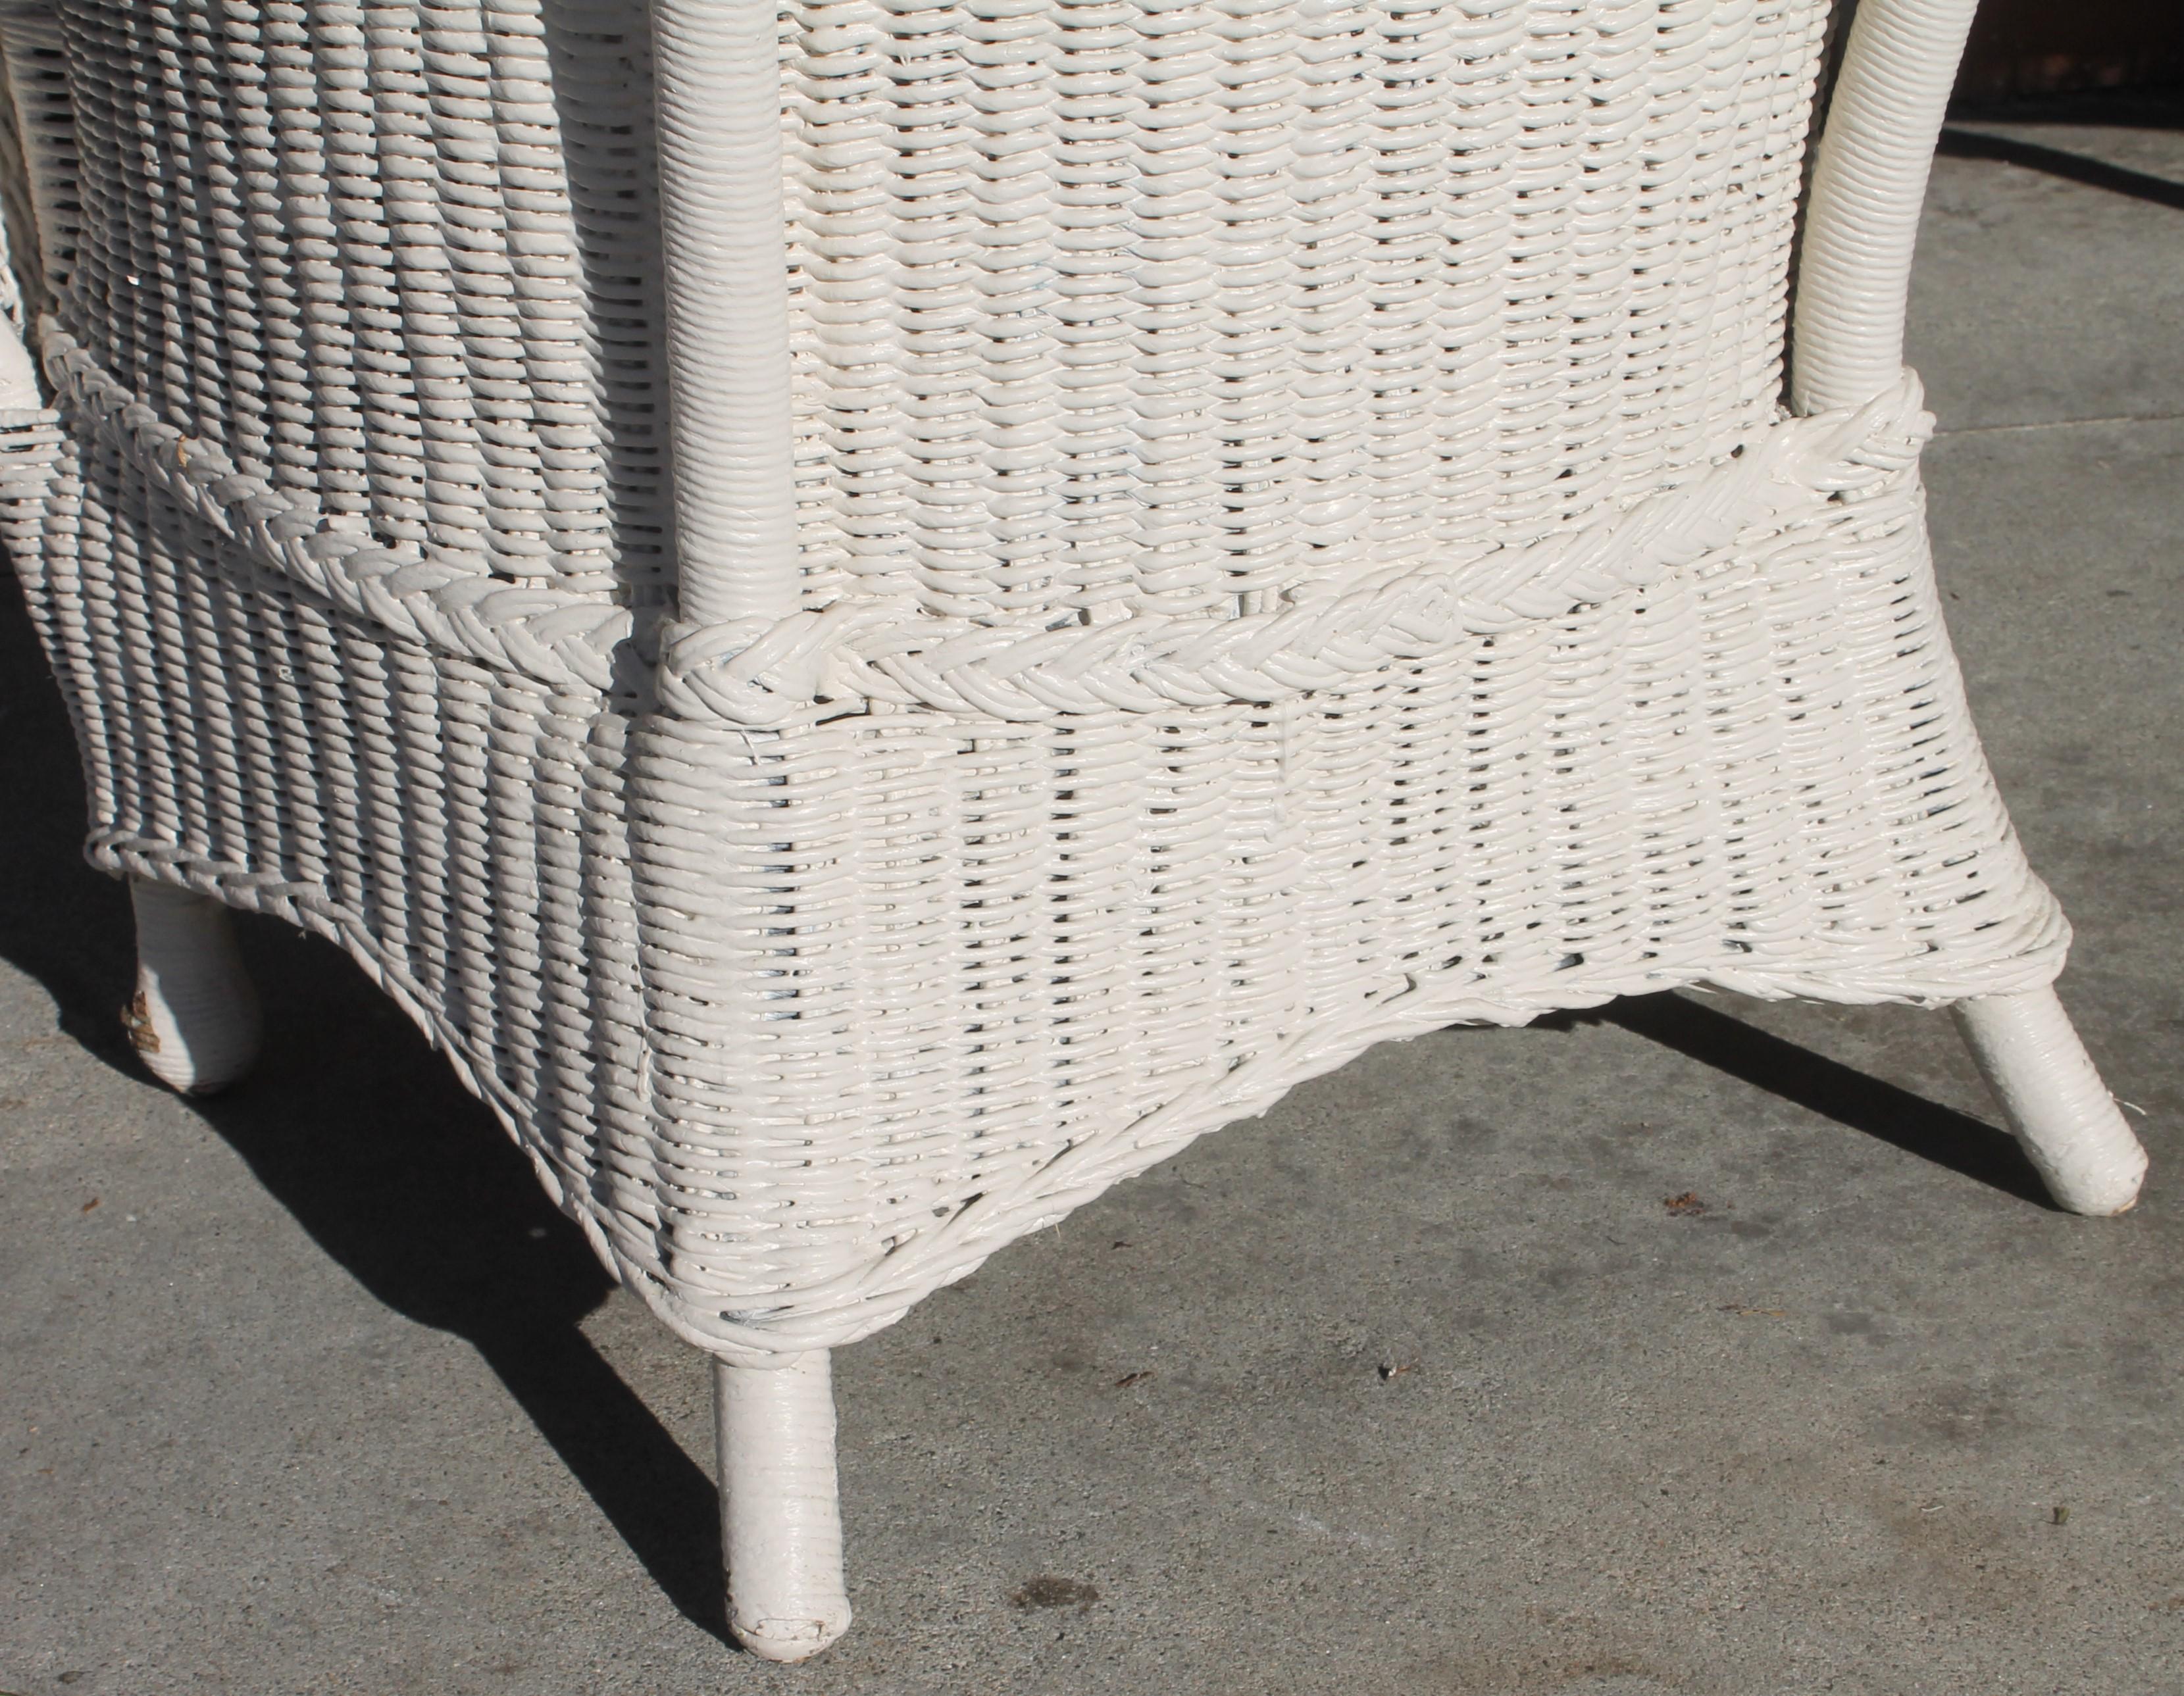 This early 20thc Bar Harbor, Maine fan back white wicker chair in amazing as found condition. This fine indoor or outdoor wicker chair was most readly found on a porch or patio. We had a vintage ticking cushion made for the chair with a zipper for